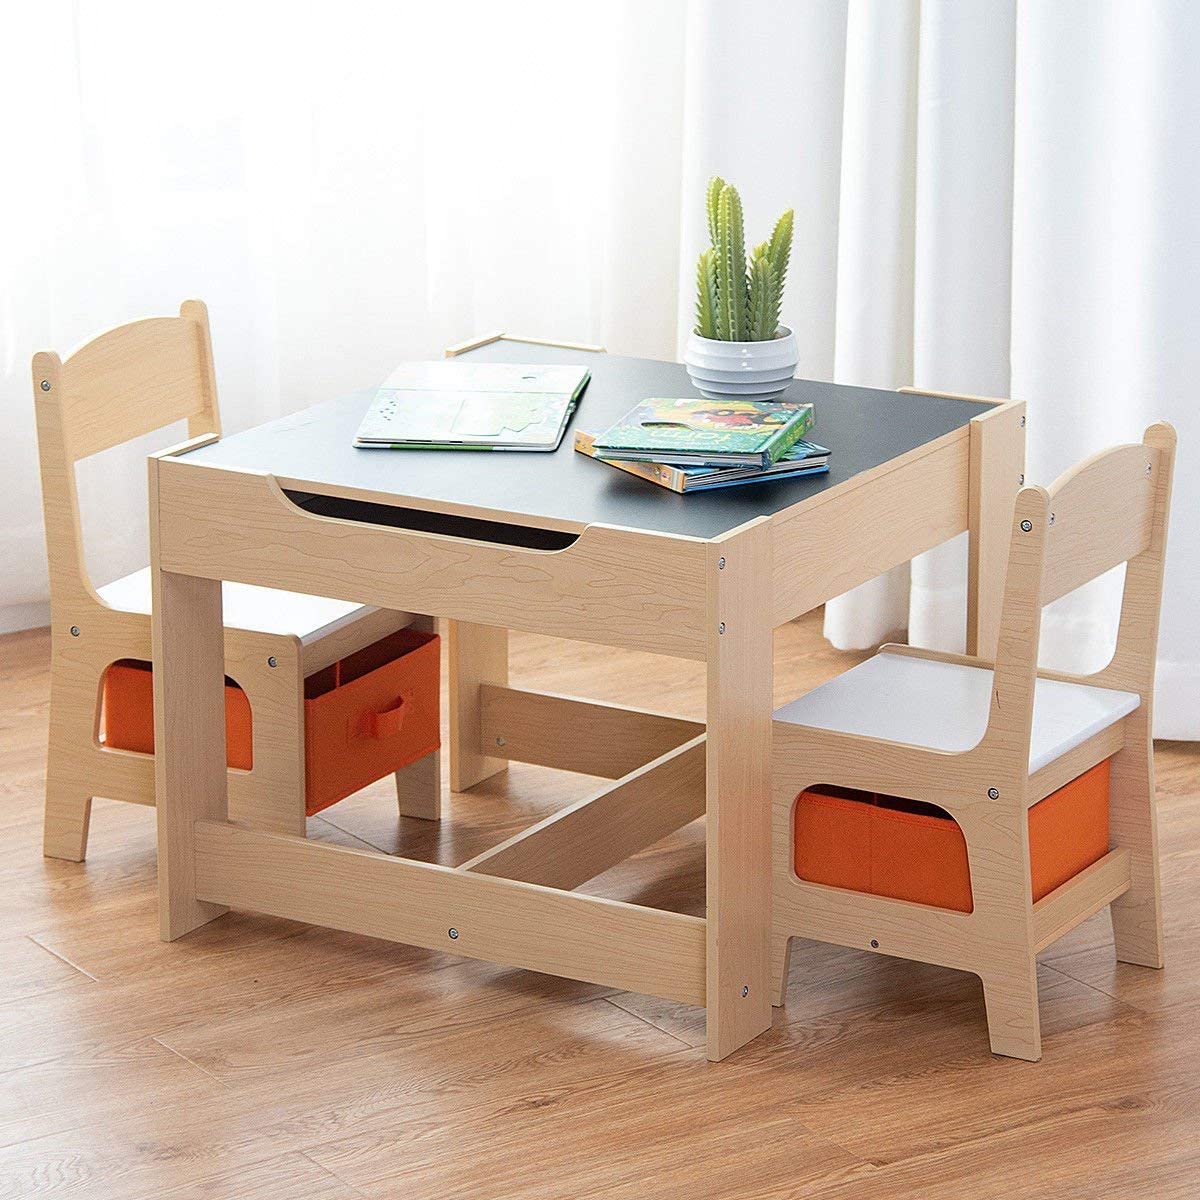 wooden table set